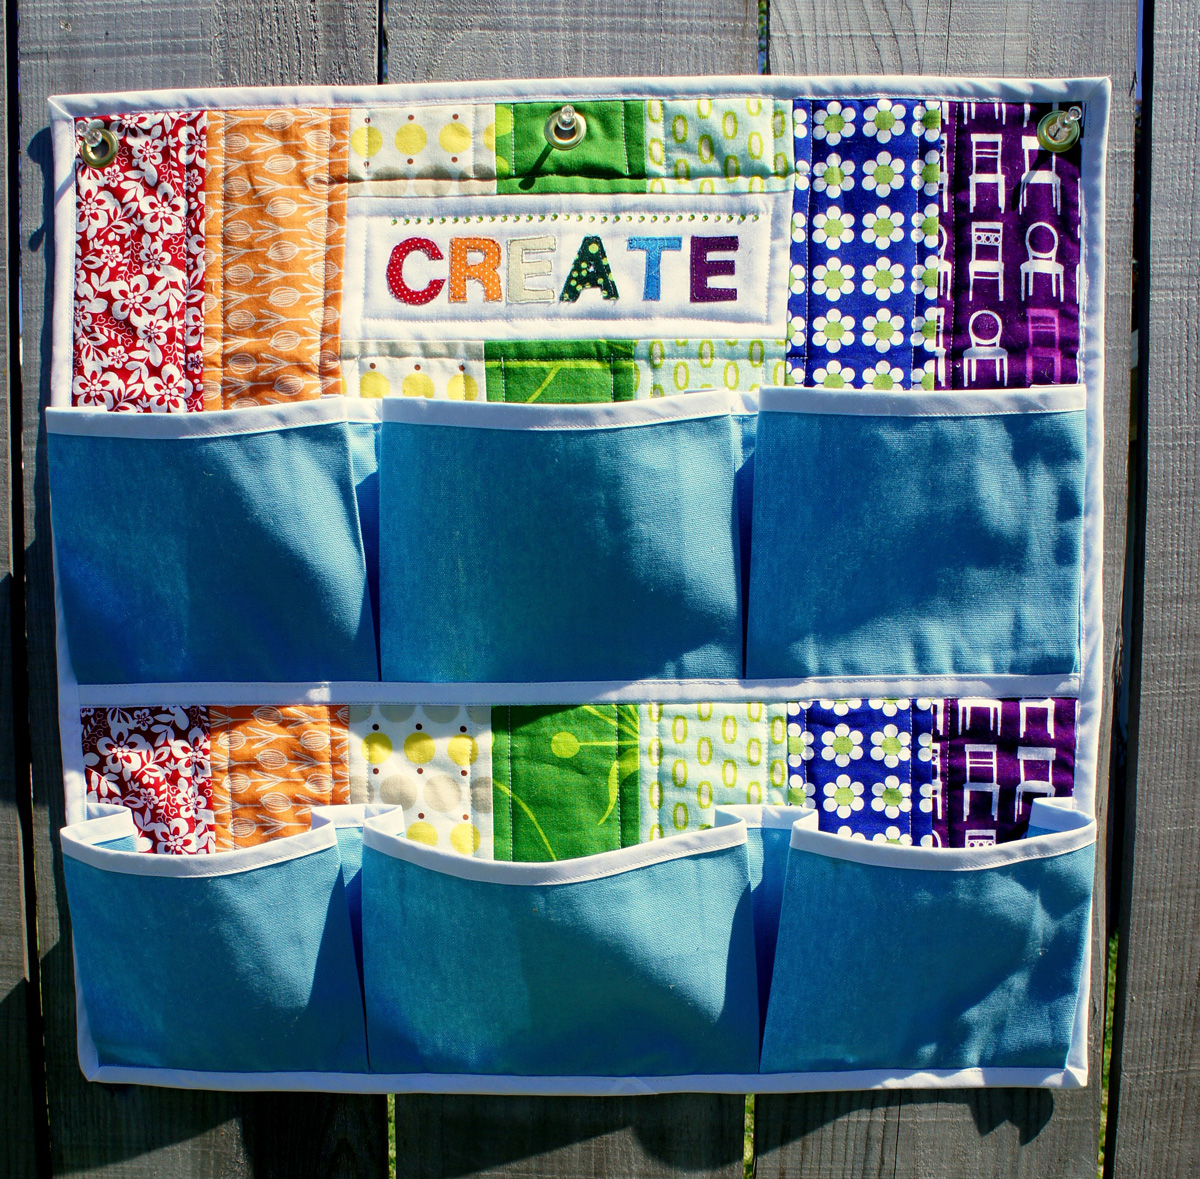 101 Patchwork Projects and Quilts - Spring 2011